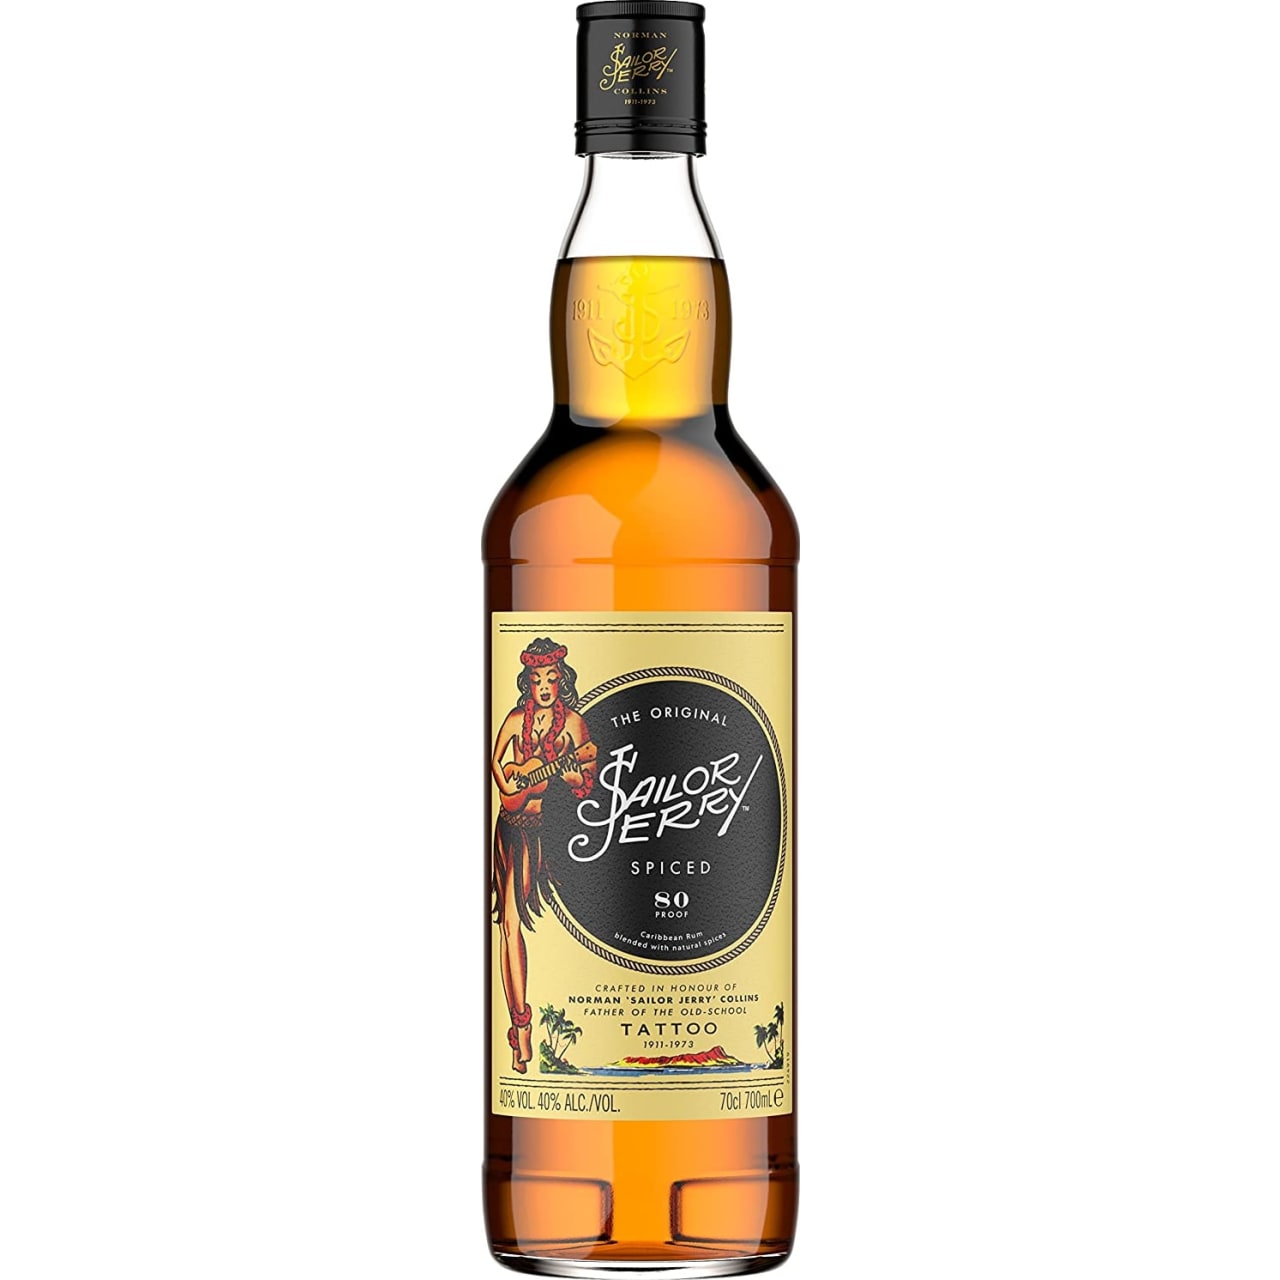 Reflecting the legacy of the great American tattoo master Norman "Sailor Jerry" Collins himself, this rum is strong but goes down smooth.